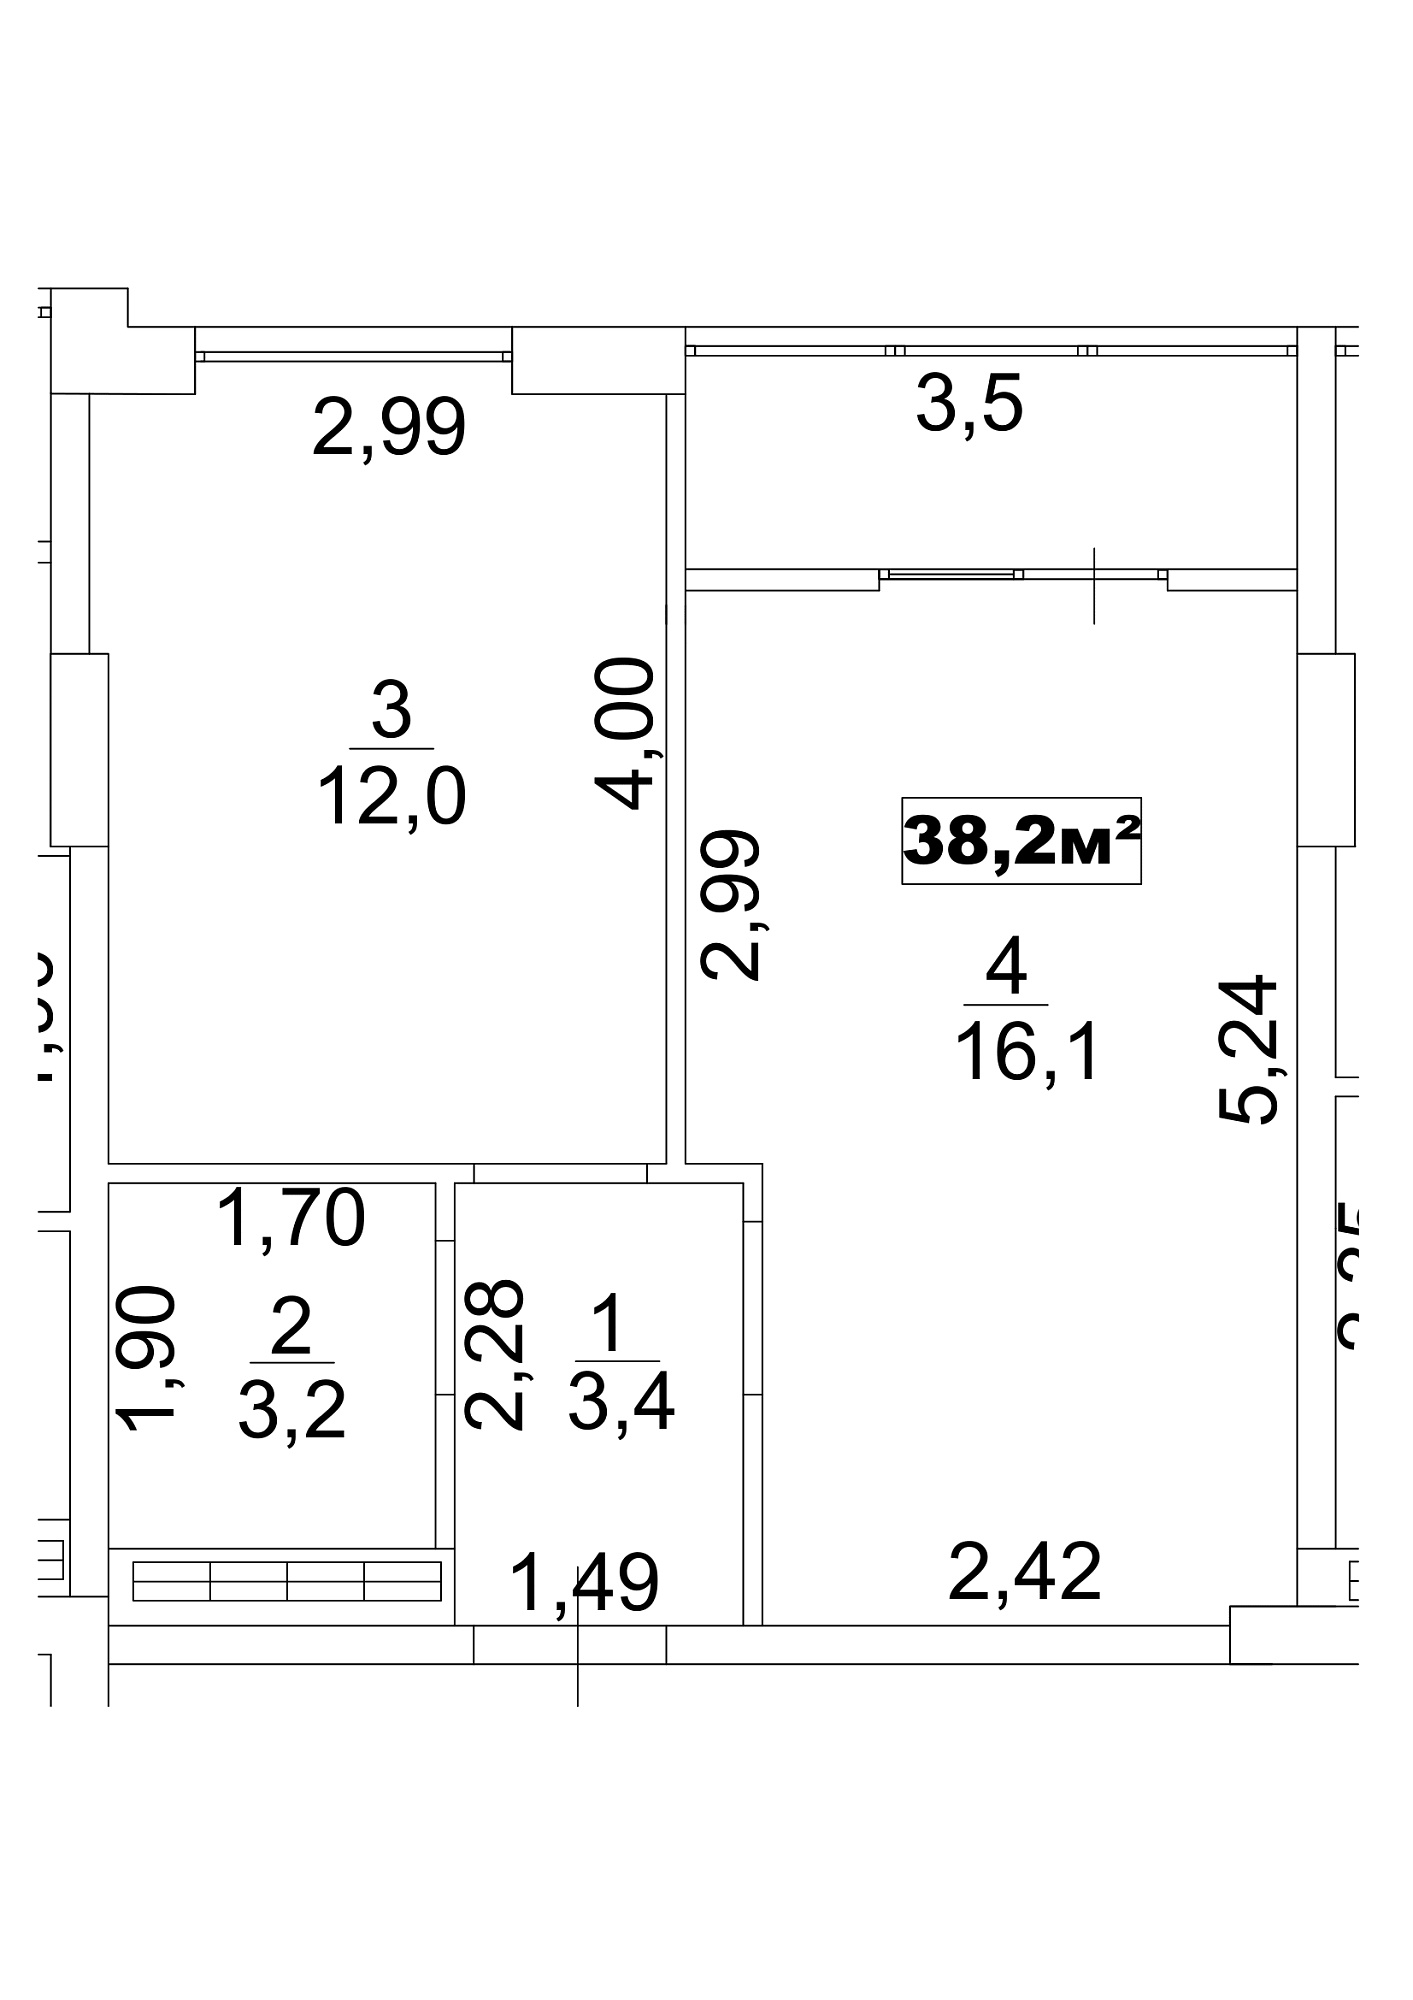 Planning 1-rm flats area 38.2m2, AB-13-10/00084.